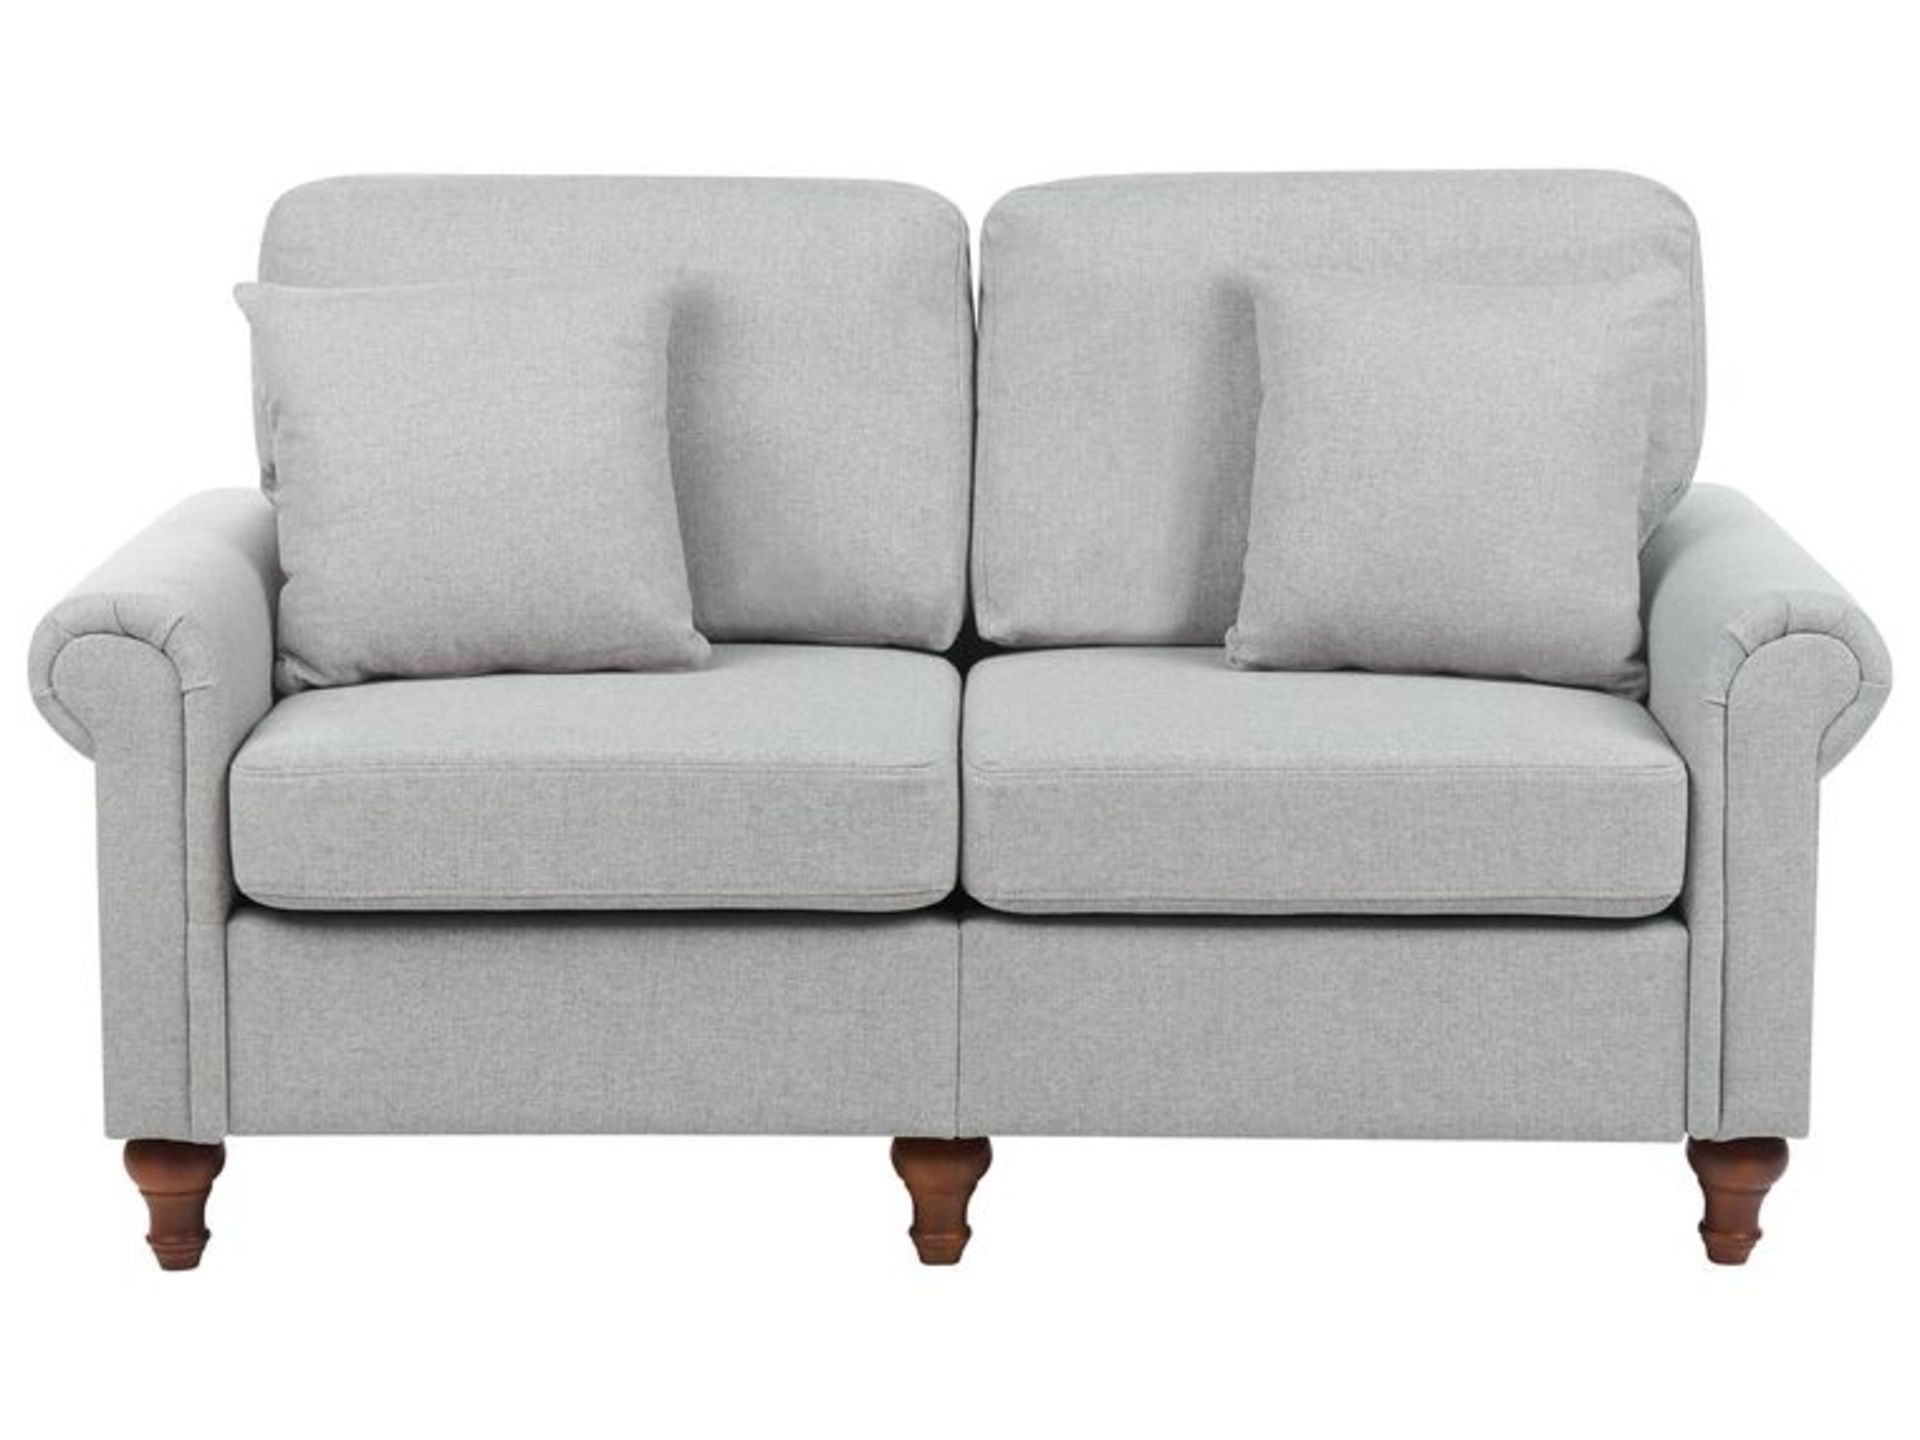 Ginnerup 2 Seater Fabric Sofa Light Grey. - R14. RRP £629.99. A modern 2-seater sofa with a